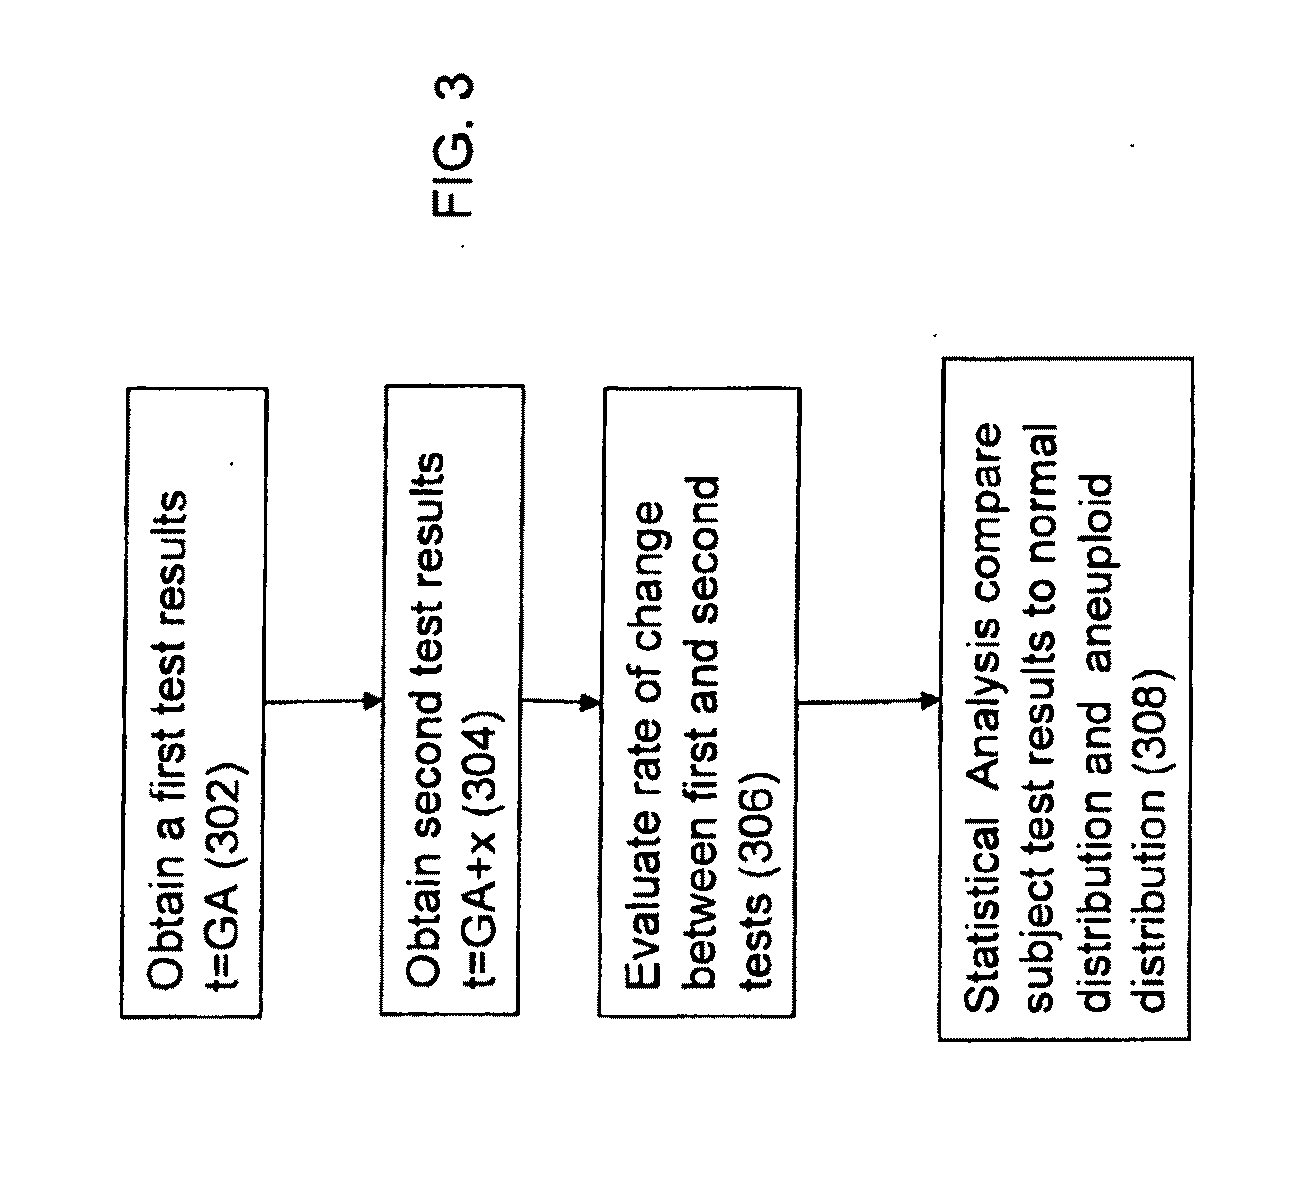 Method for antenatal estimation of risk of aneuploidy